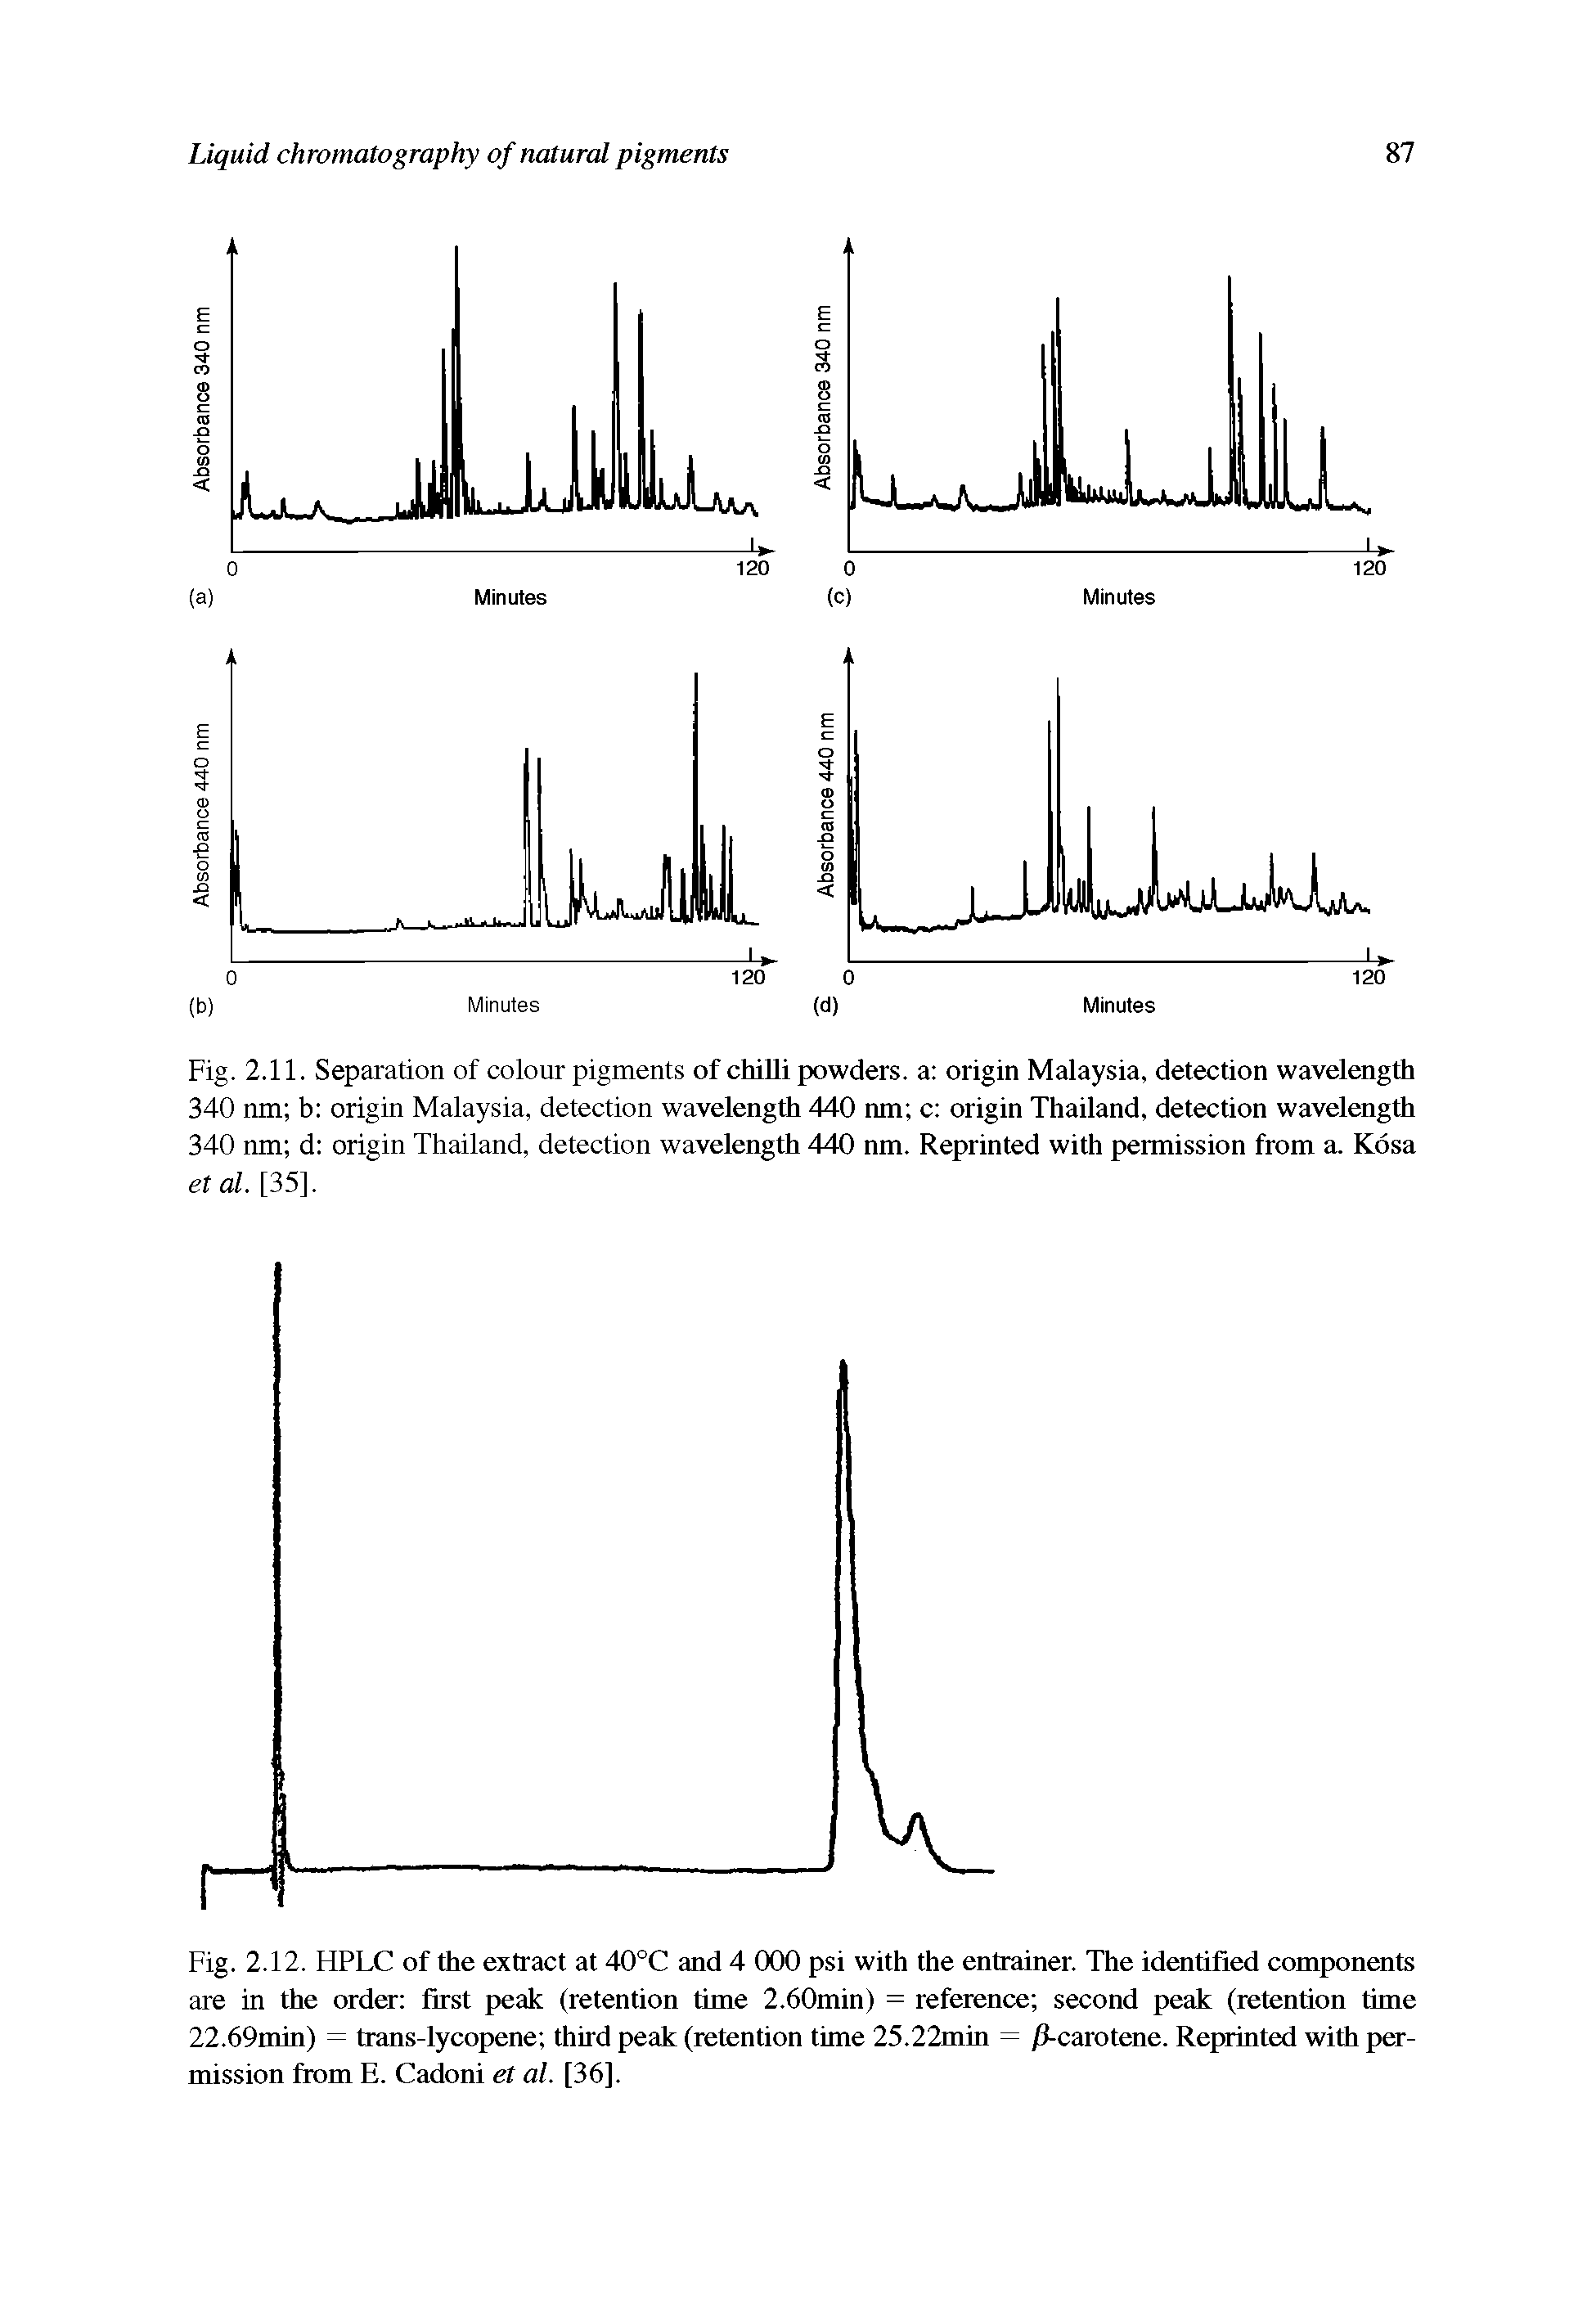 Fig. 2.11. Separation of colour pigments of chilli powders, a origin Malaysia, detection wavelength 340 nm b origin Malaysia, detection wavelength 440 nm c origin Thailand, detection wavelength 340 nm d origin Thailand, detection wavelength 440 nm. Reprinted with permission from a. Kosa et al. [35].